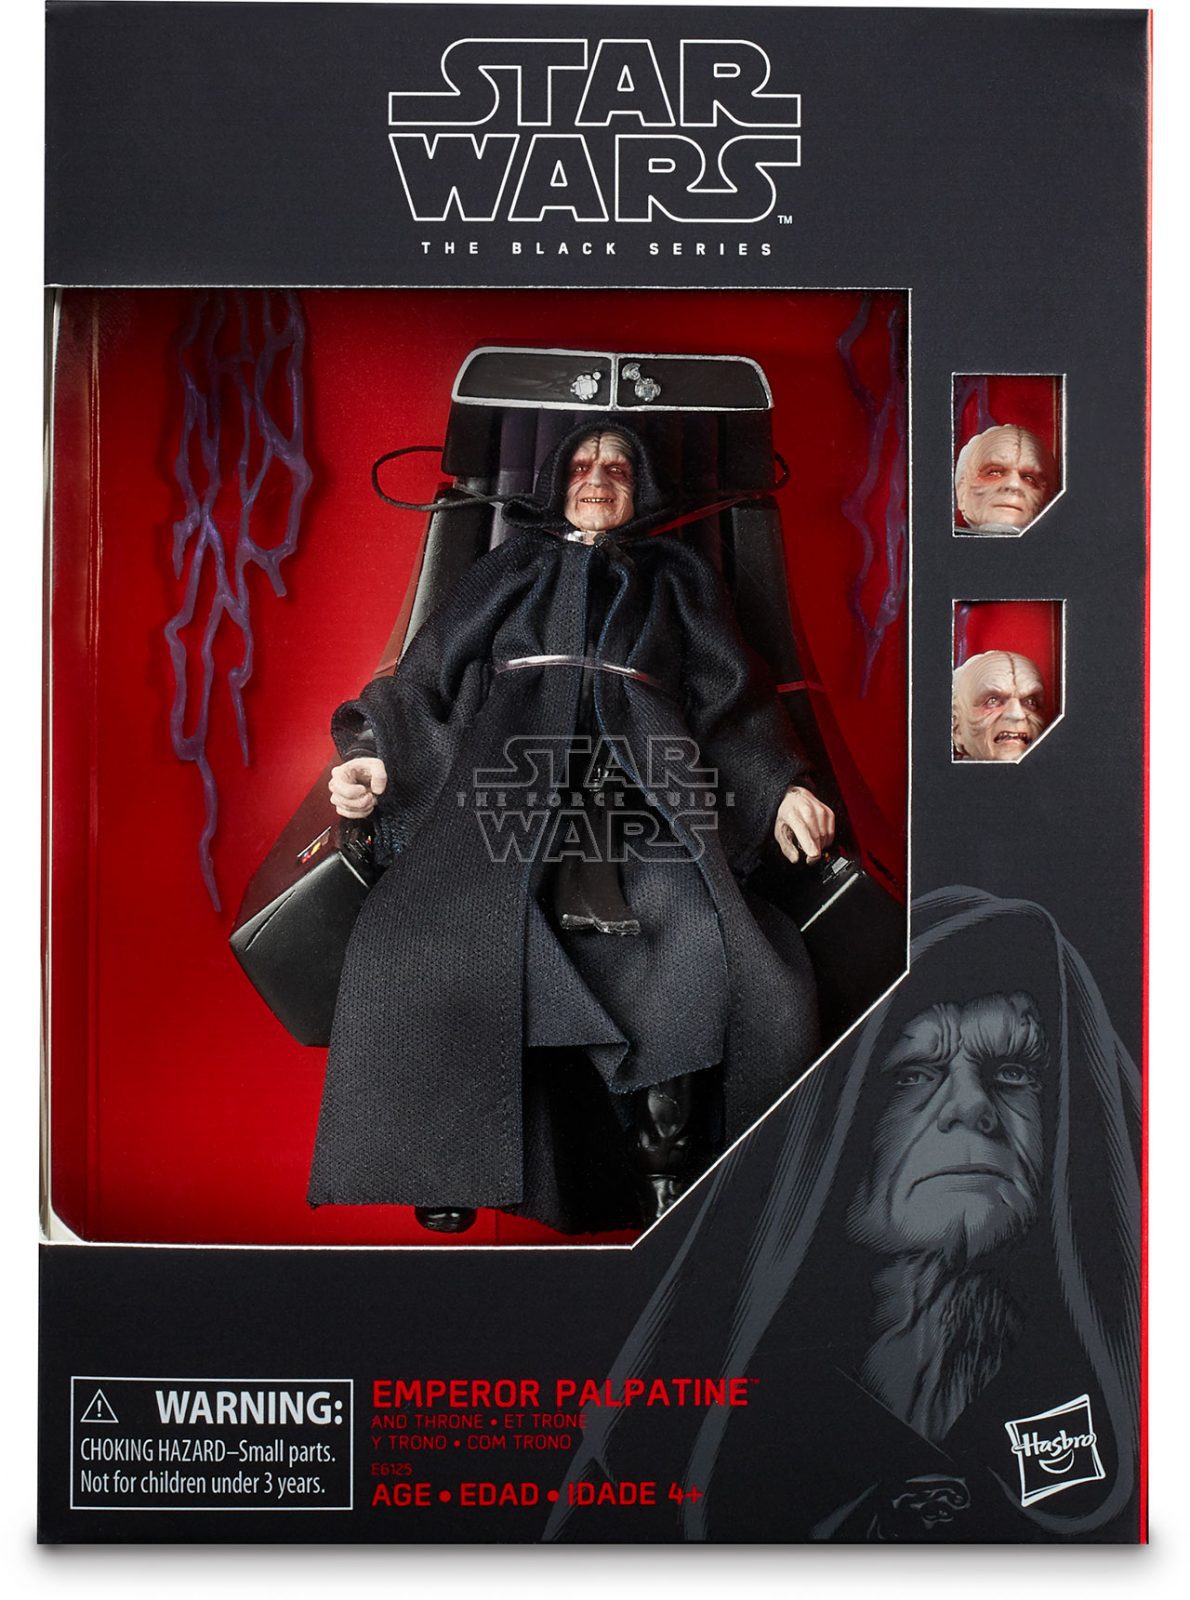 STAR-WARS-THE-BLACK-SERIES-6-INCH-EMPEROR-PALPATINE-Figure-with-Throne-(in-pck-2)